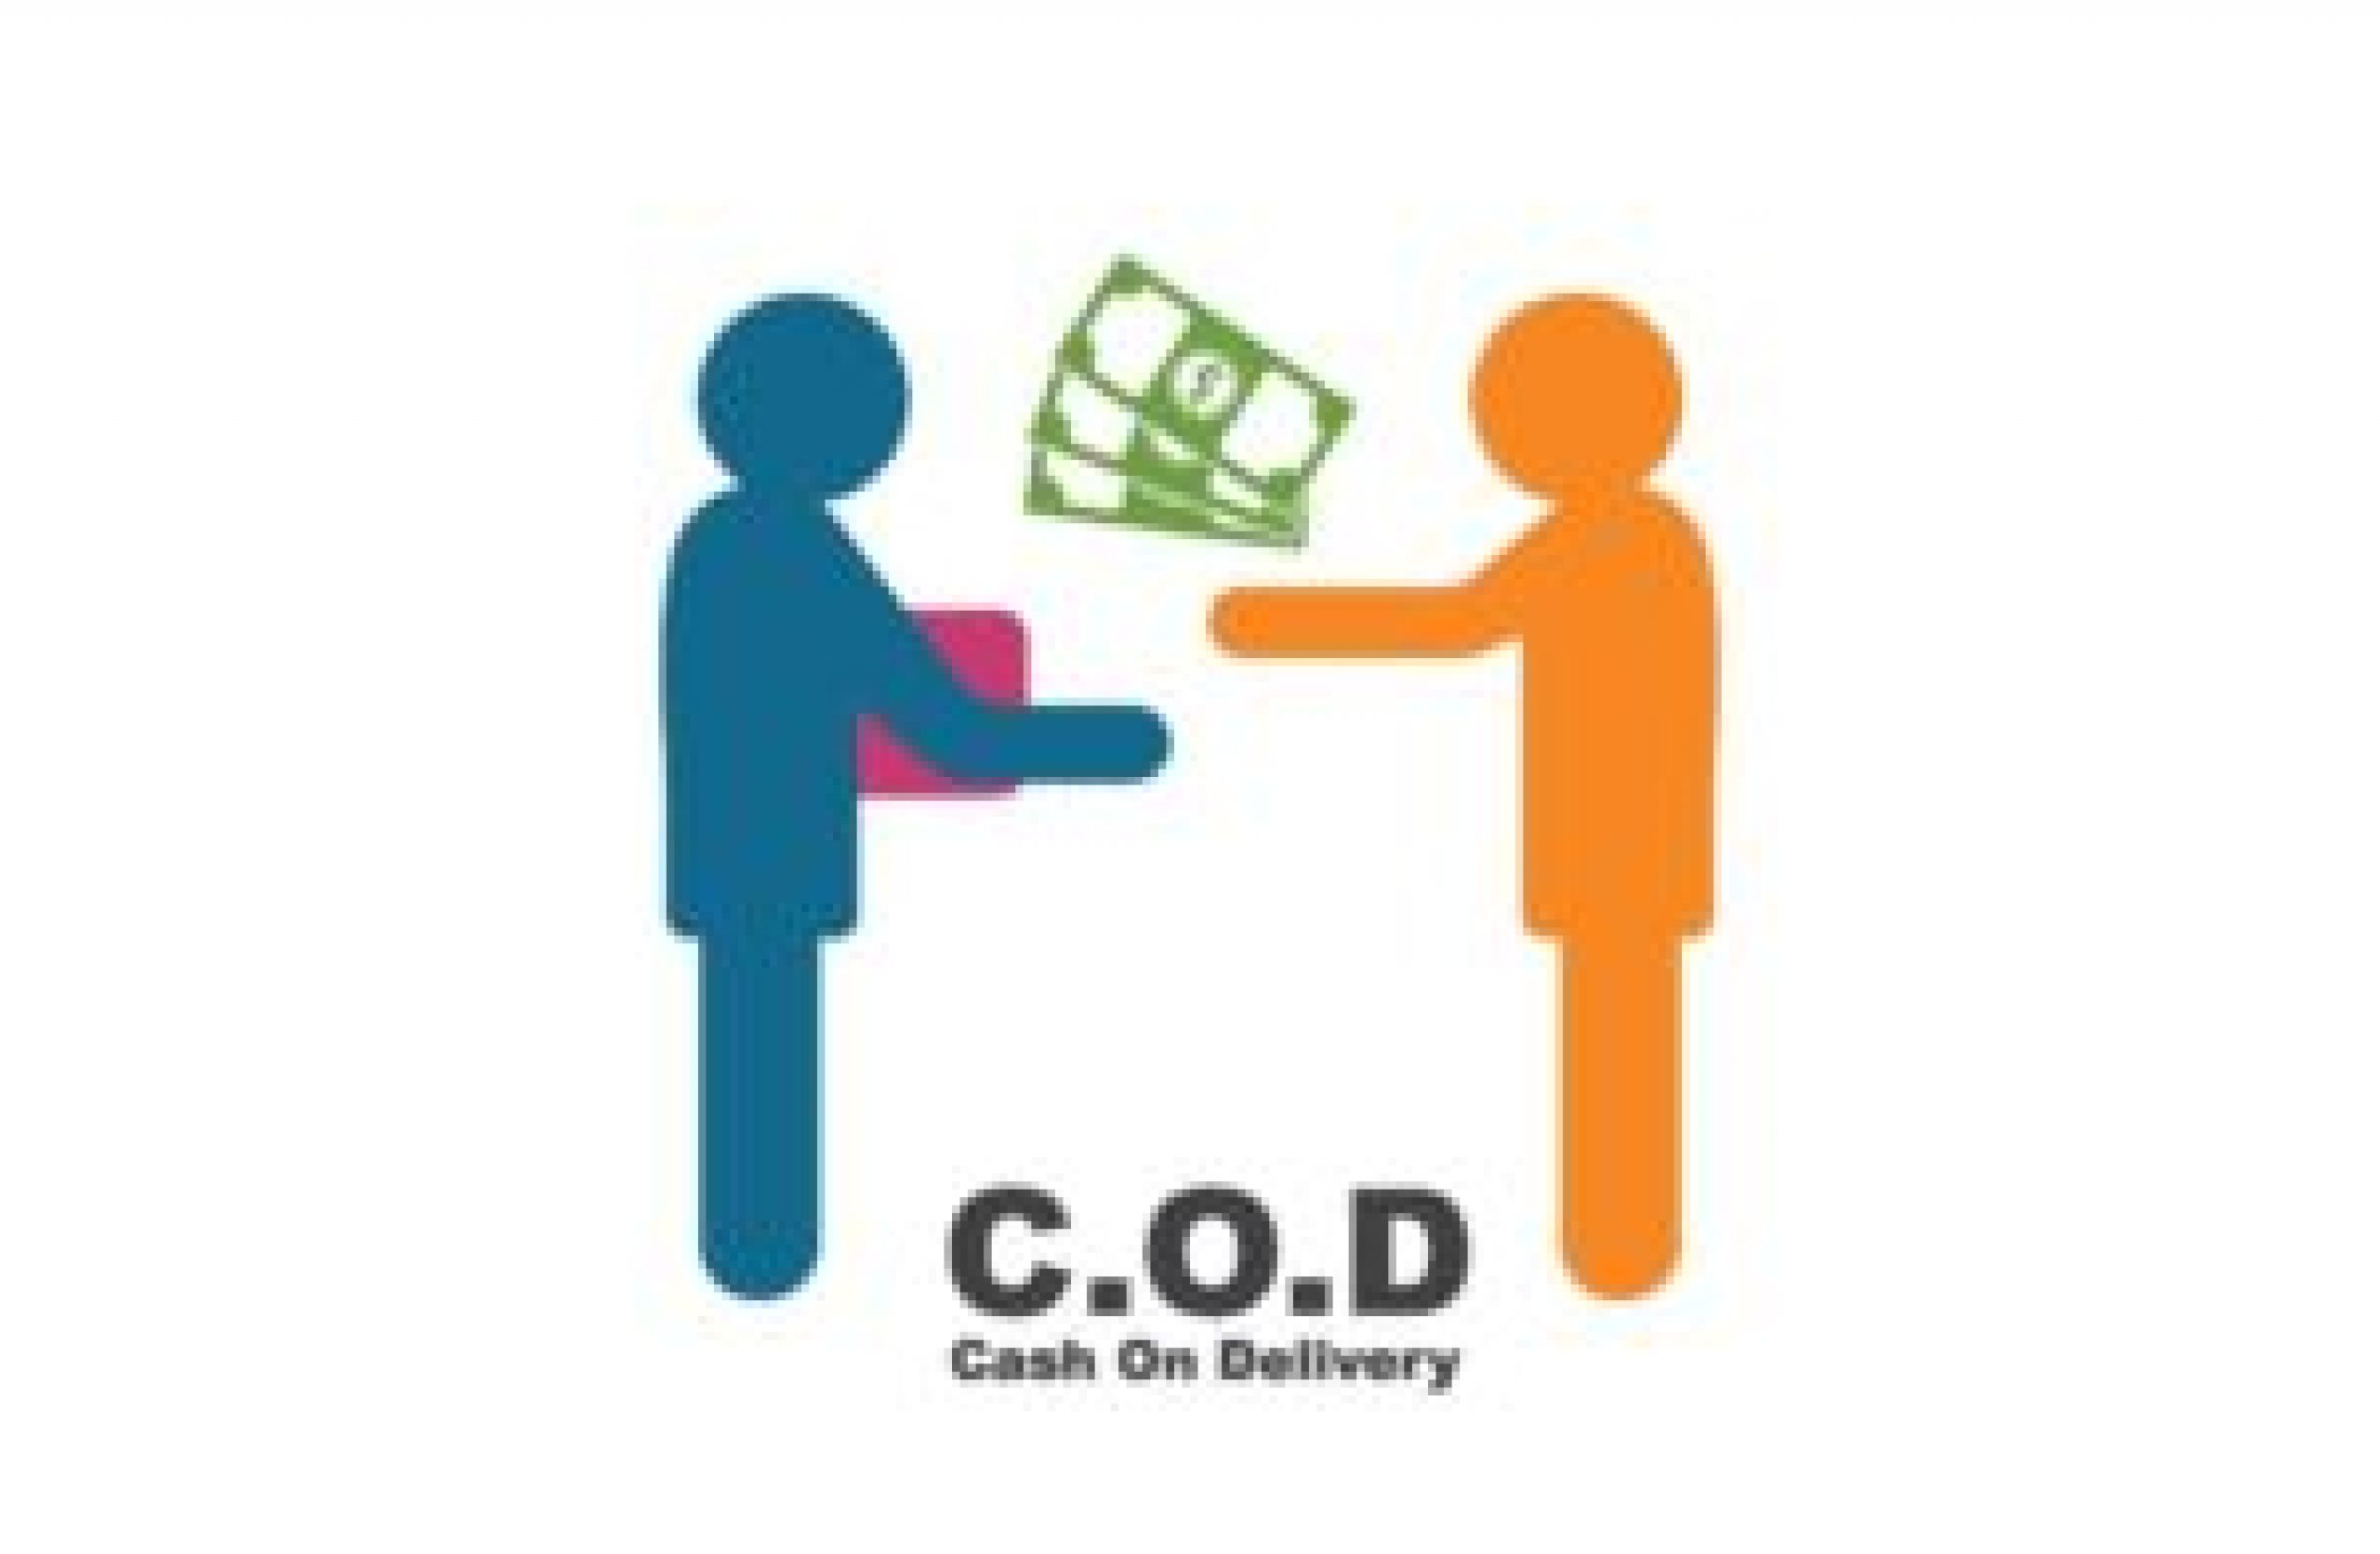 cash on delivery  delivery vector icon illustration design